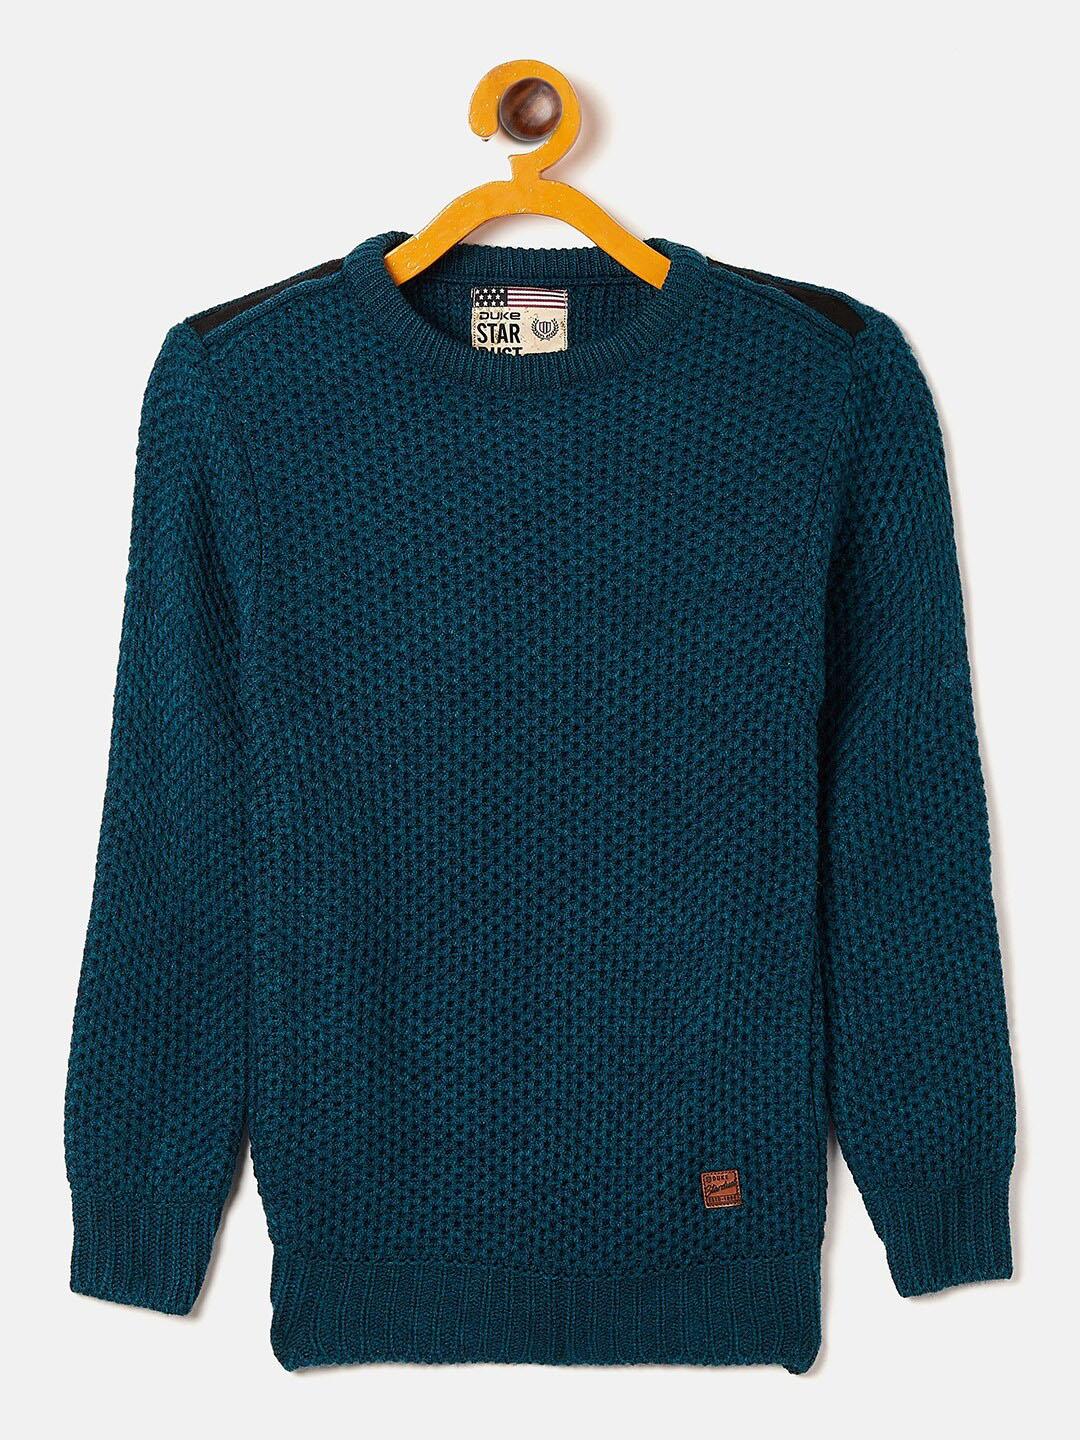 Duke Boys Blue Cable Knit Woolen Pullover